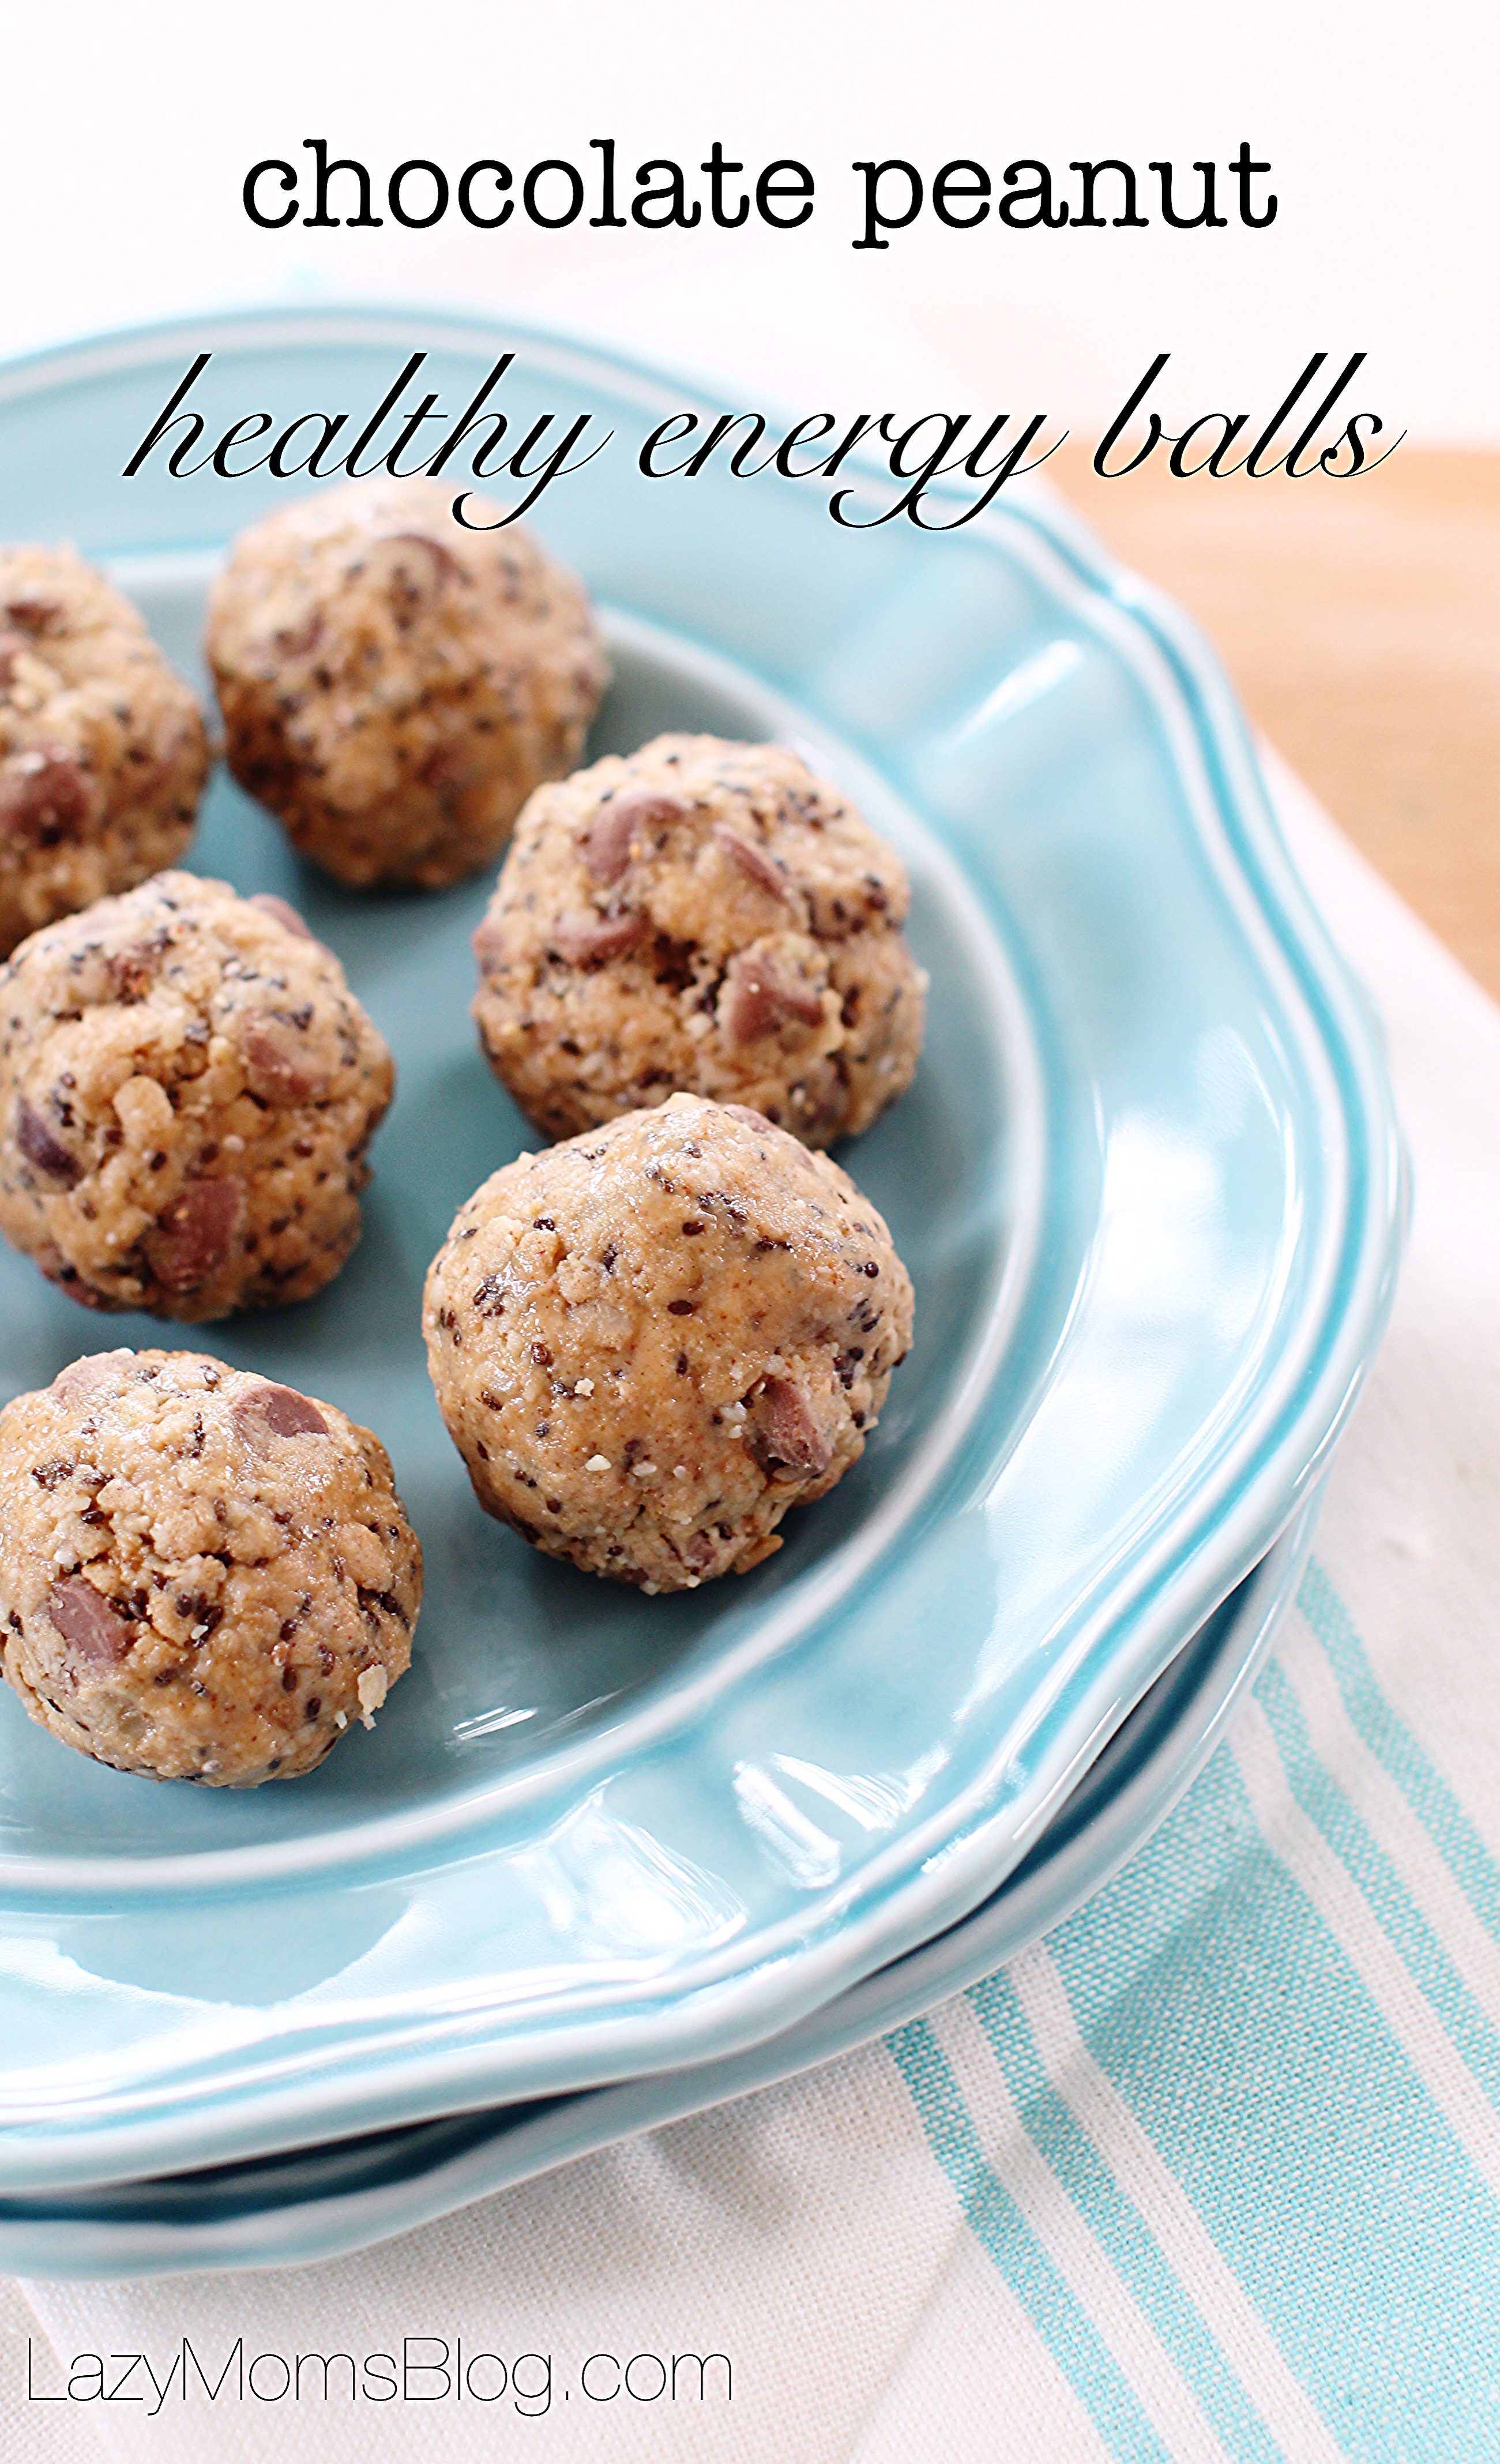 These chocolate peanut energy balls are the perfect little bites to boost your energy and nourish your cravings. The best  chocolate peanut healthy energy balls out there!